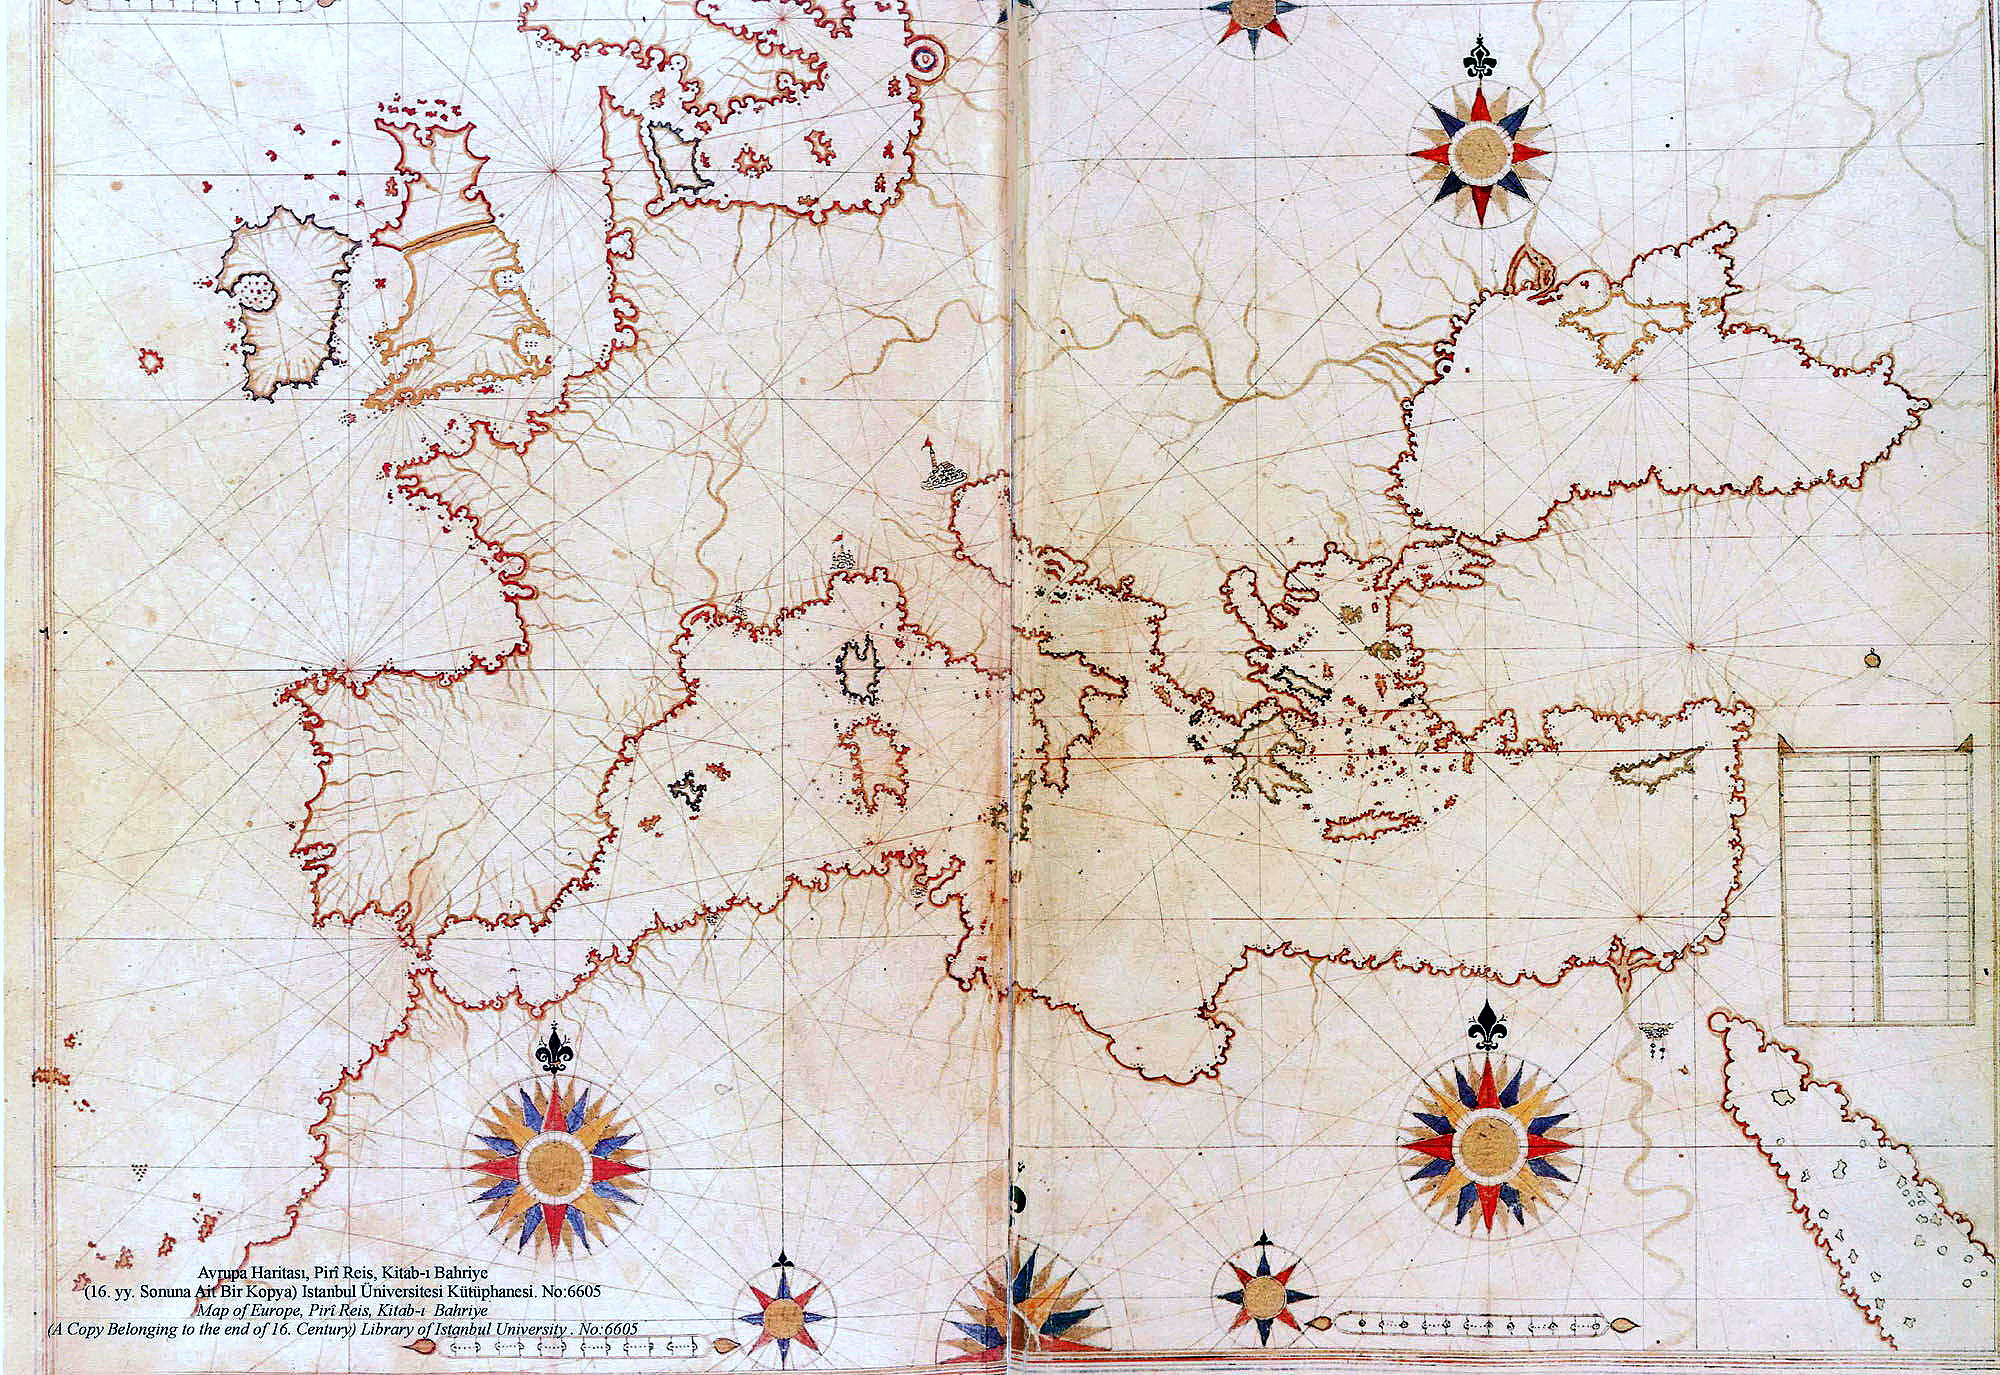 Map by Piri Reis of the Mediterranean and Europe, from between 1511 and 1525